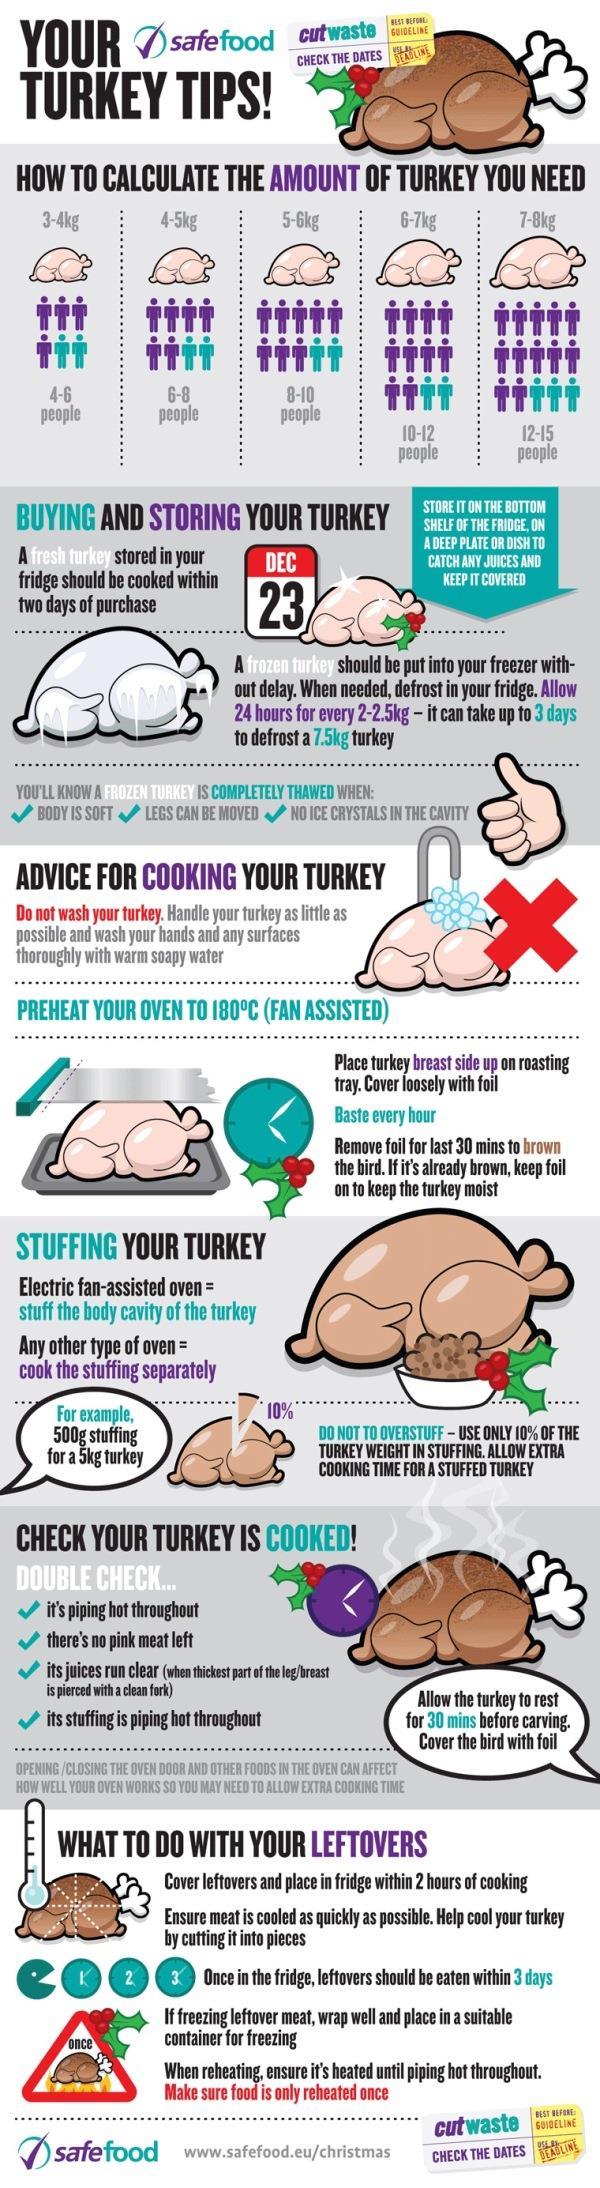 Turkey Tips Infographic for Xmas